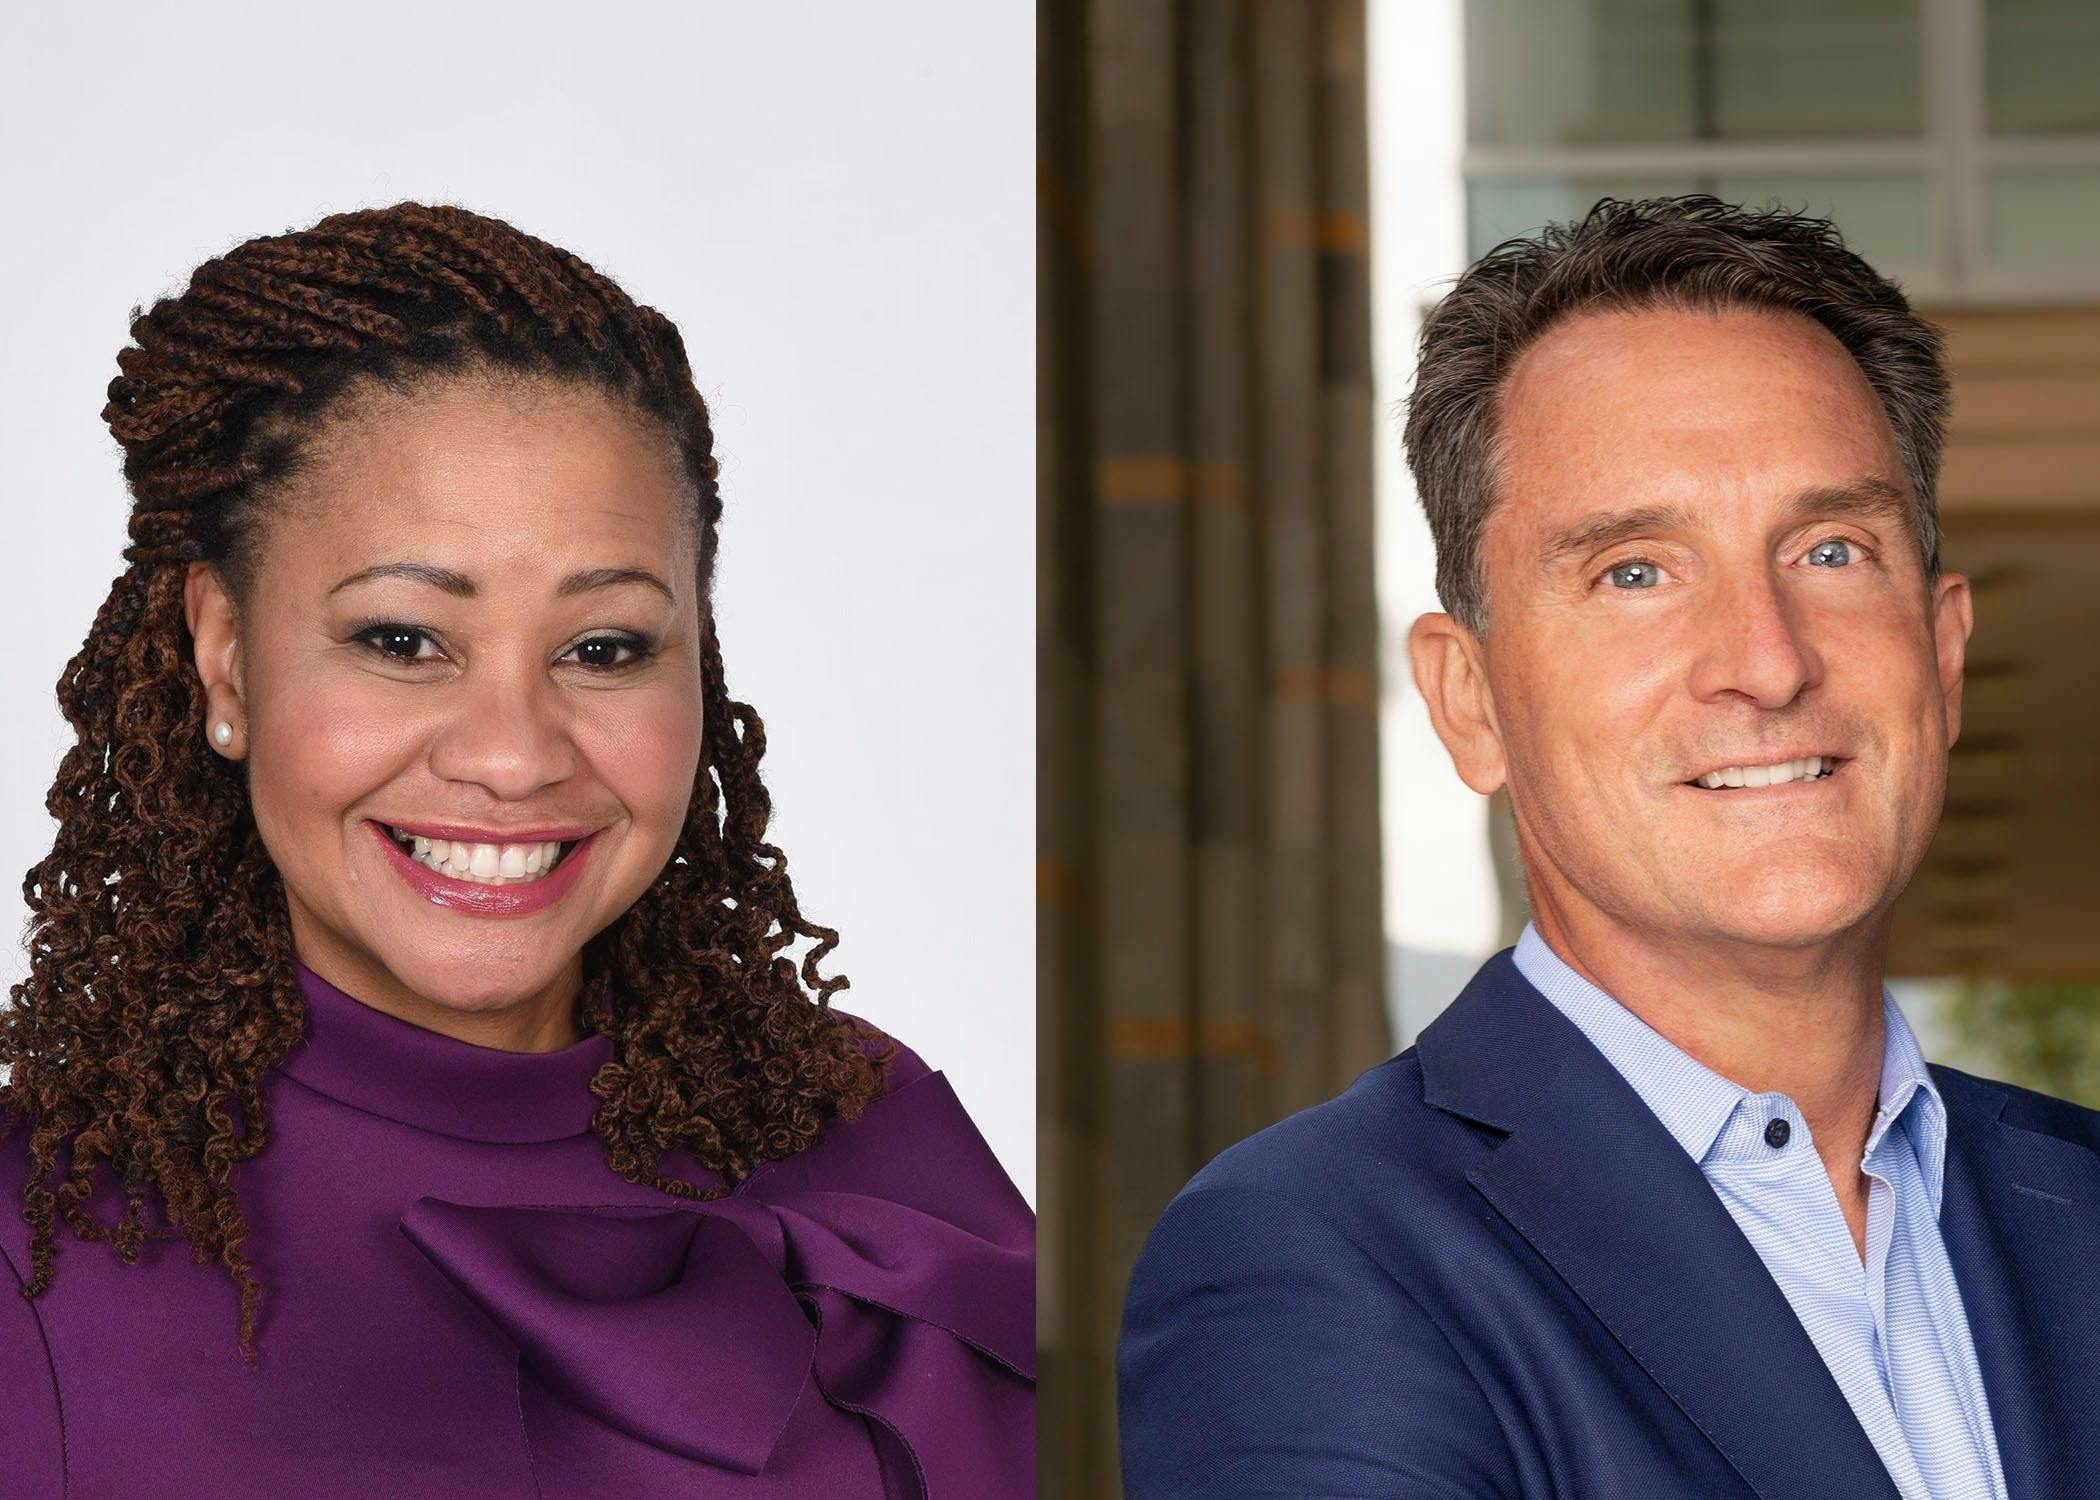 Building Up Health Equity: Q&A With Ian Thompson and Ponda Motsepe-Ditshego of Amgen